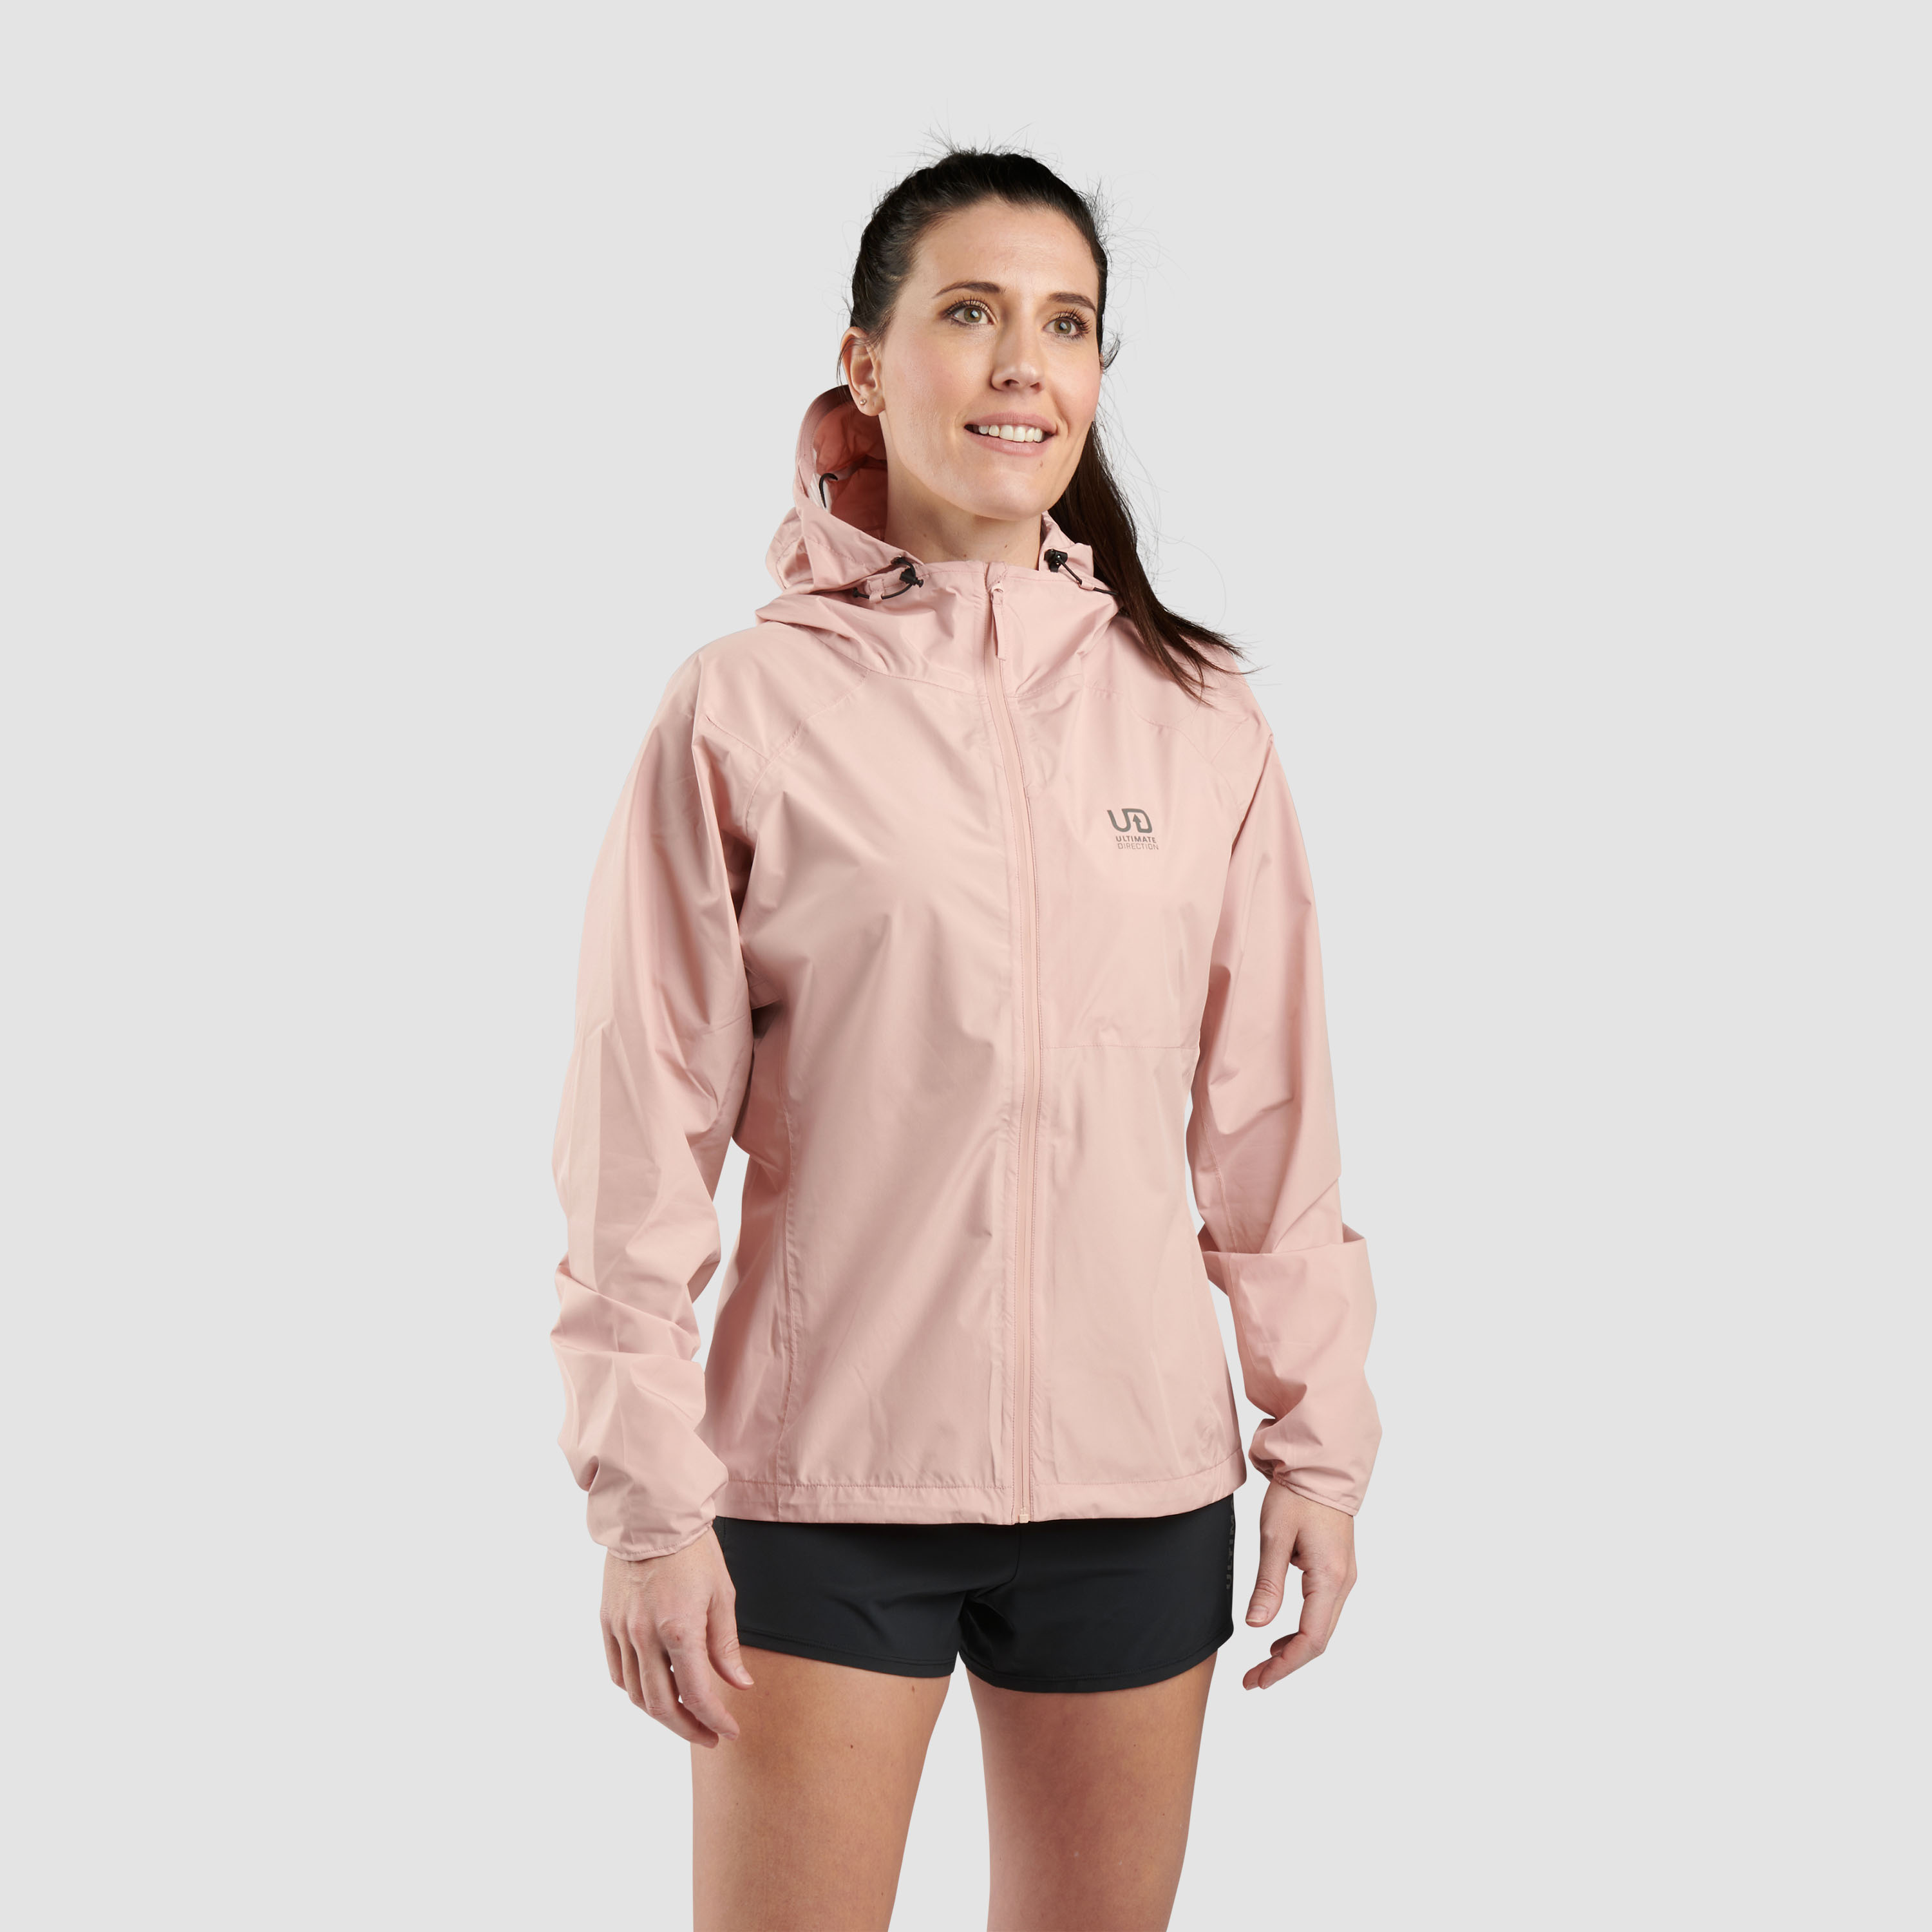 Image Ultimate Direction Deluge Jacket Women CLAY XS